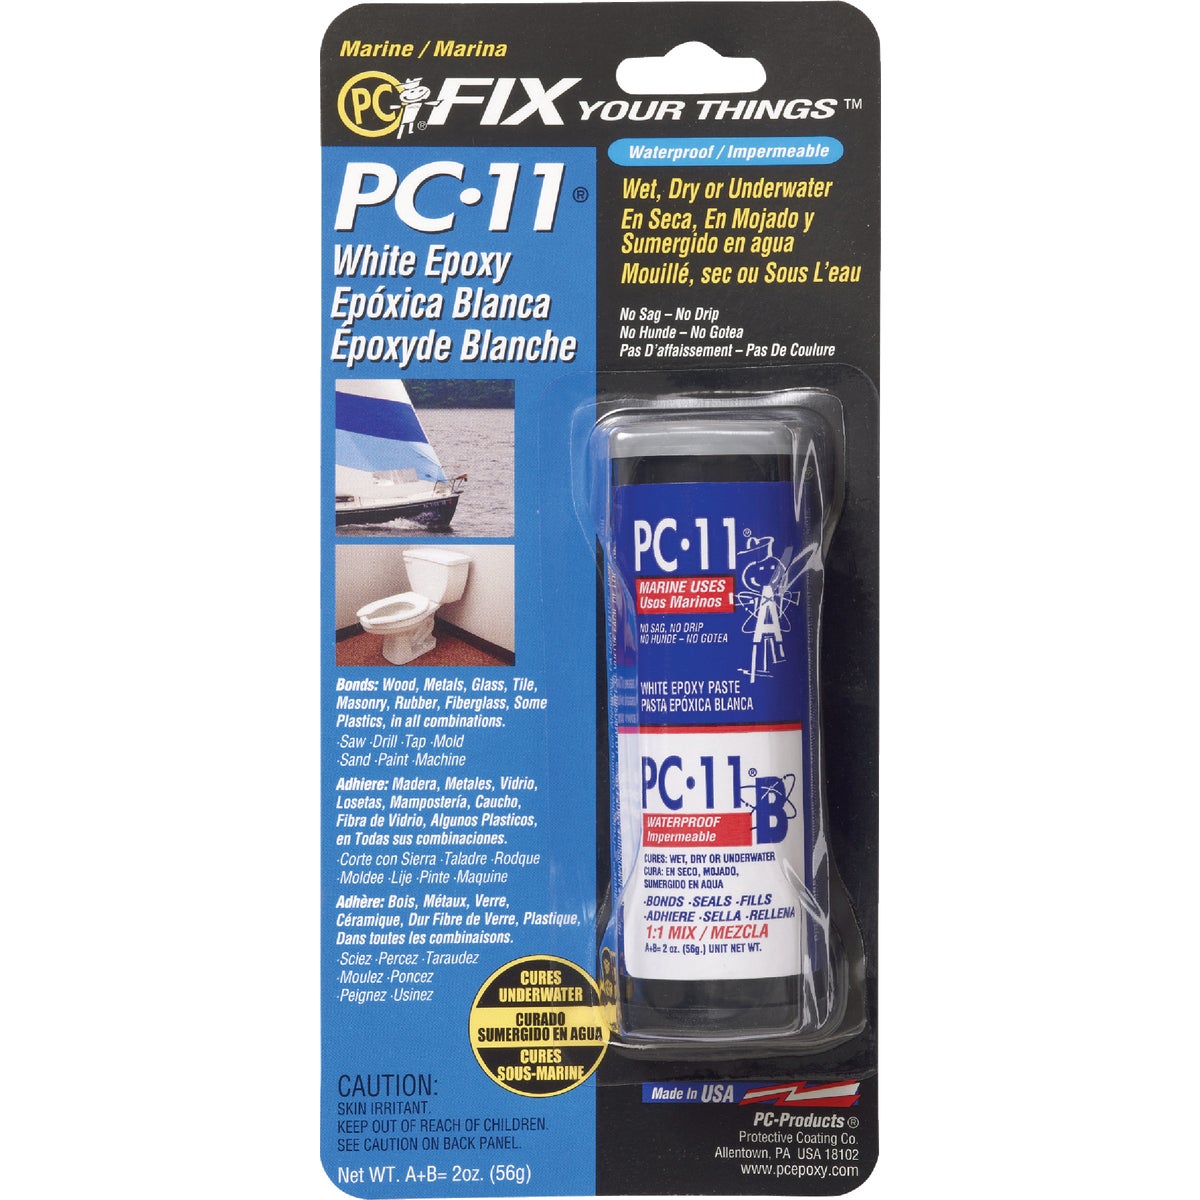 Item 357642, 2-component epoxy paste for use in bonding, sealing, and as a filler for 